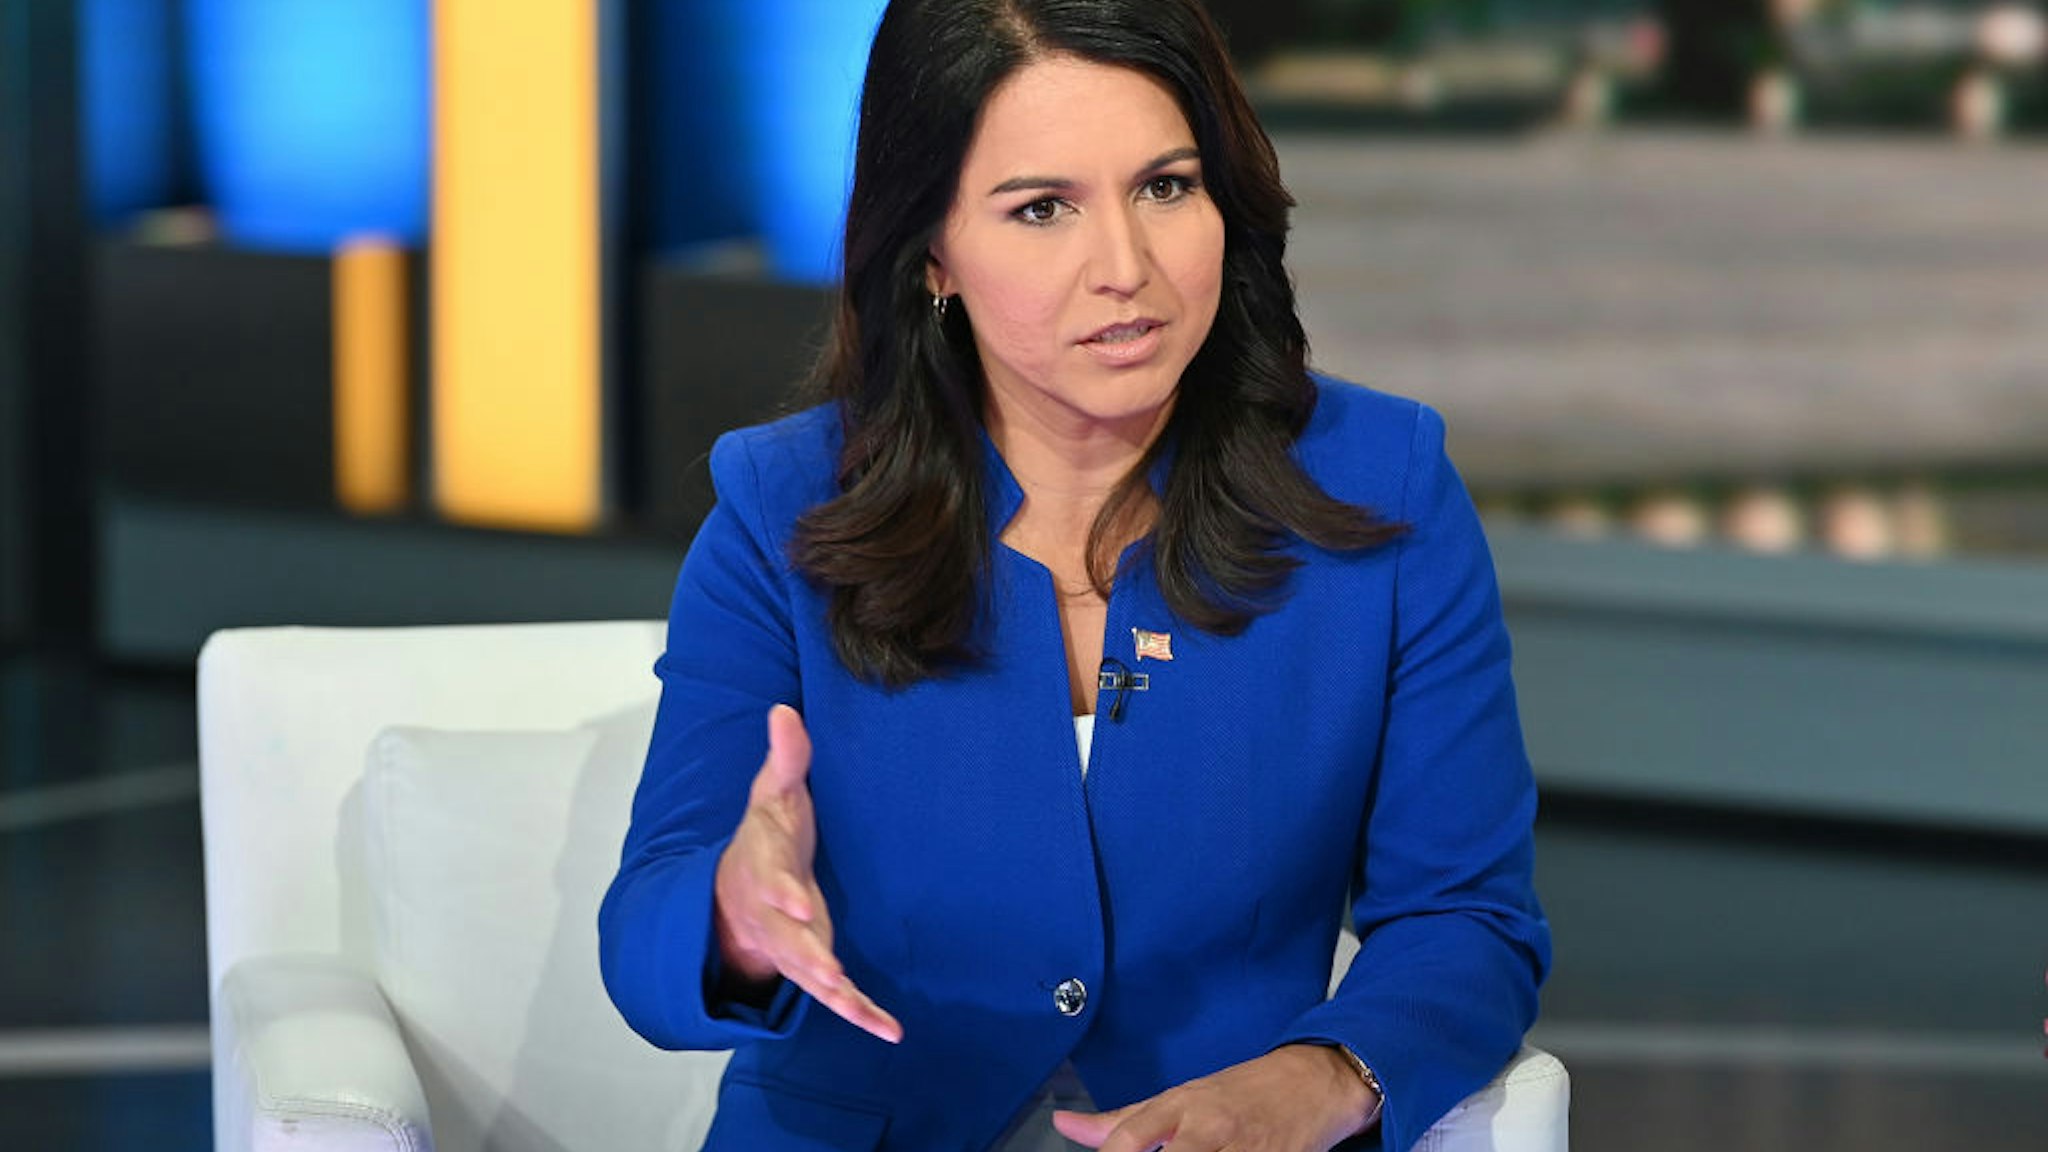 Democratic Presidential Candidate Tulsi Gabbard visits "FOX & Friends" at Fox News Channel Studios on September 24, 2019 in New York City